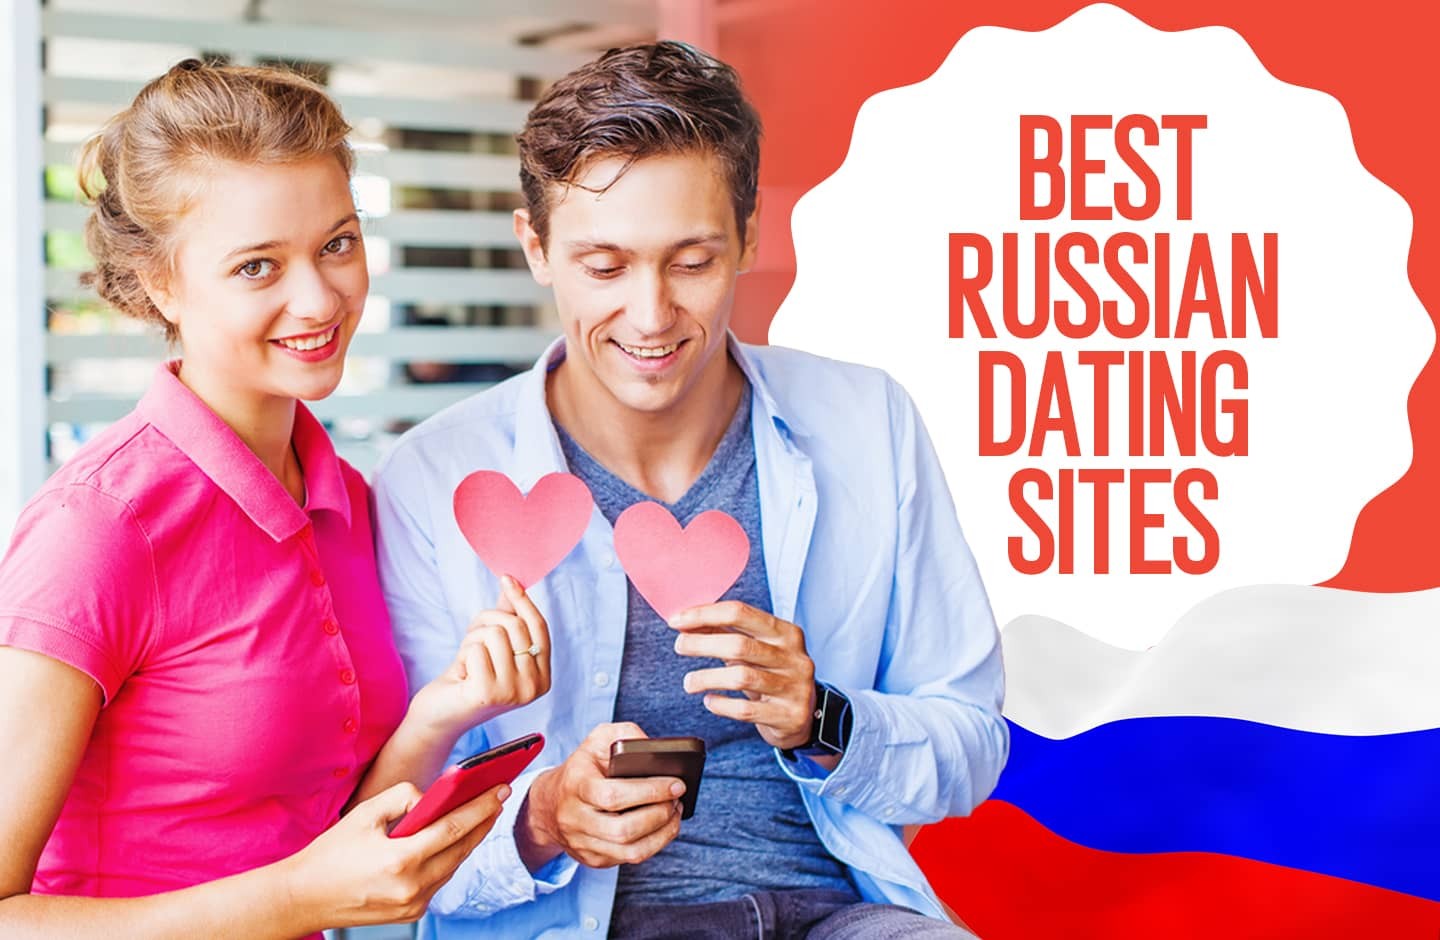 The Top Dating Sites on Facebook and Instagram